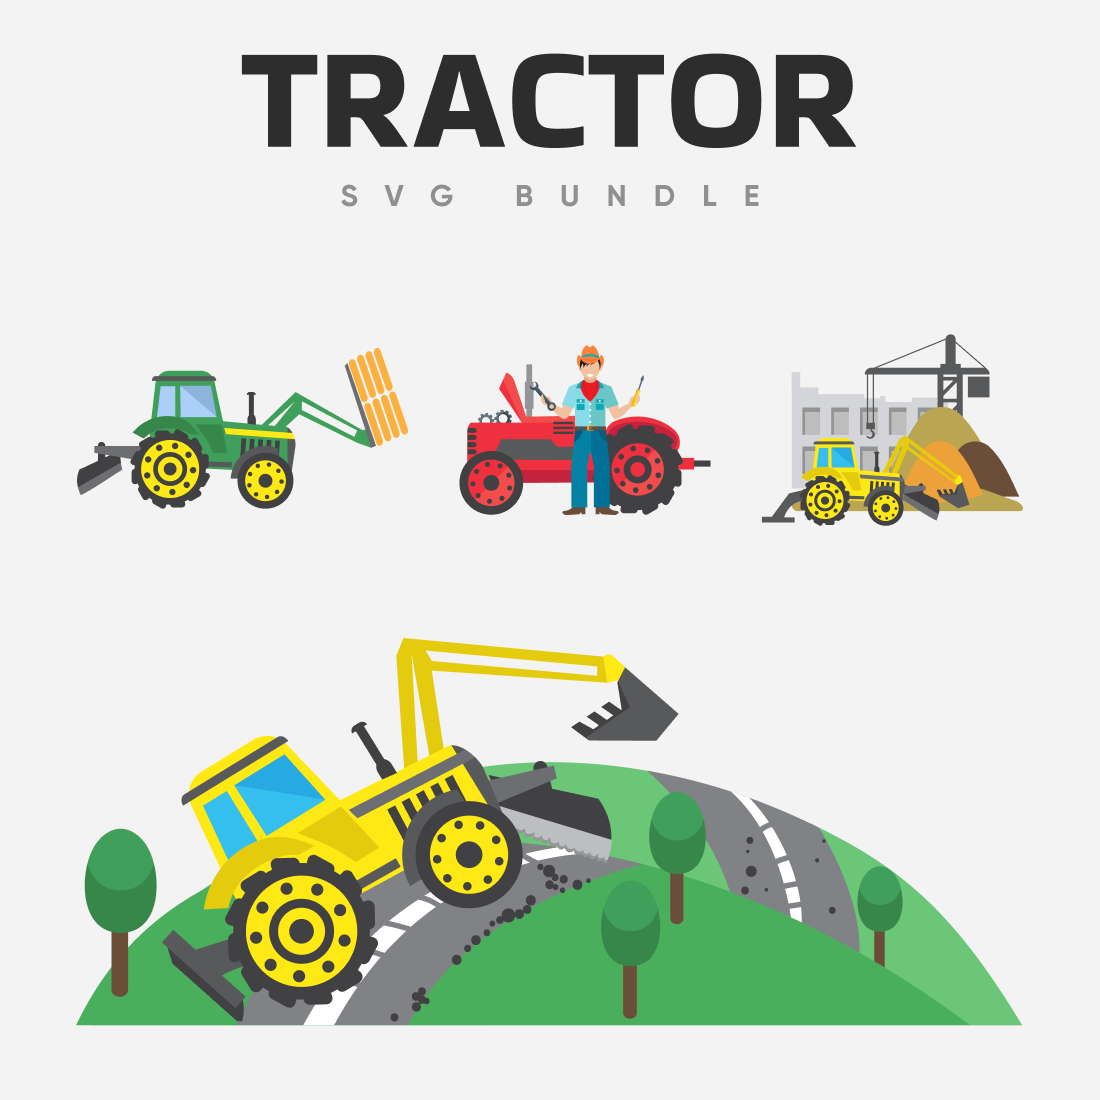 Many form tractor svg.